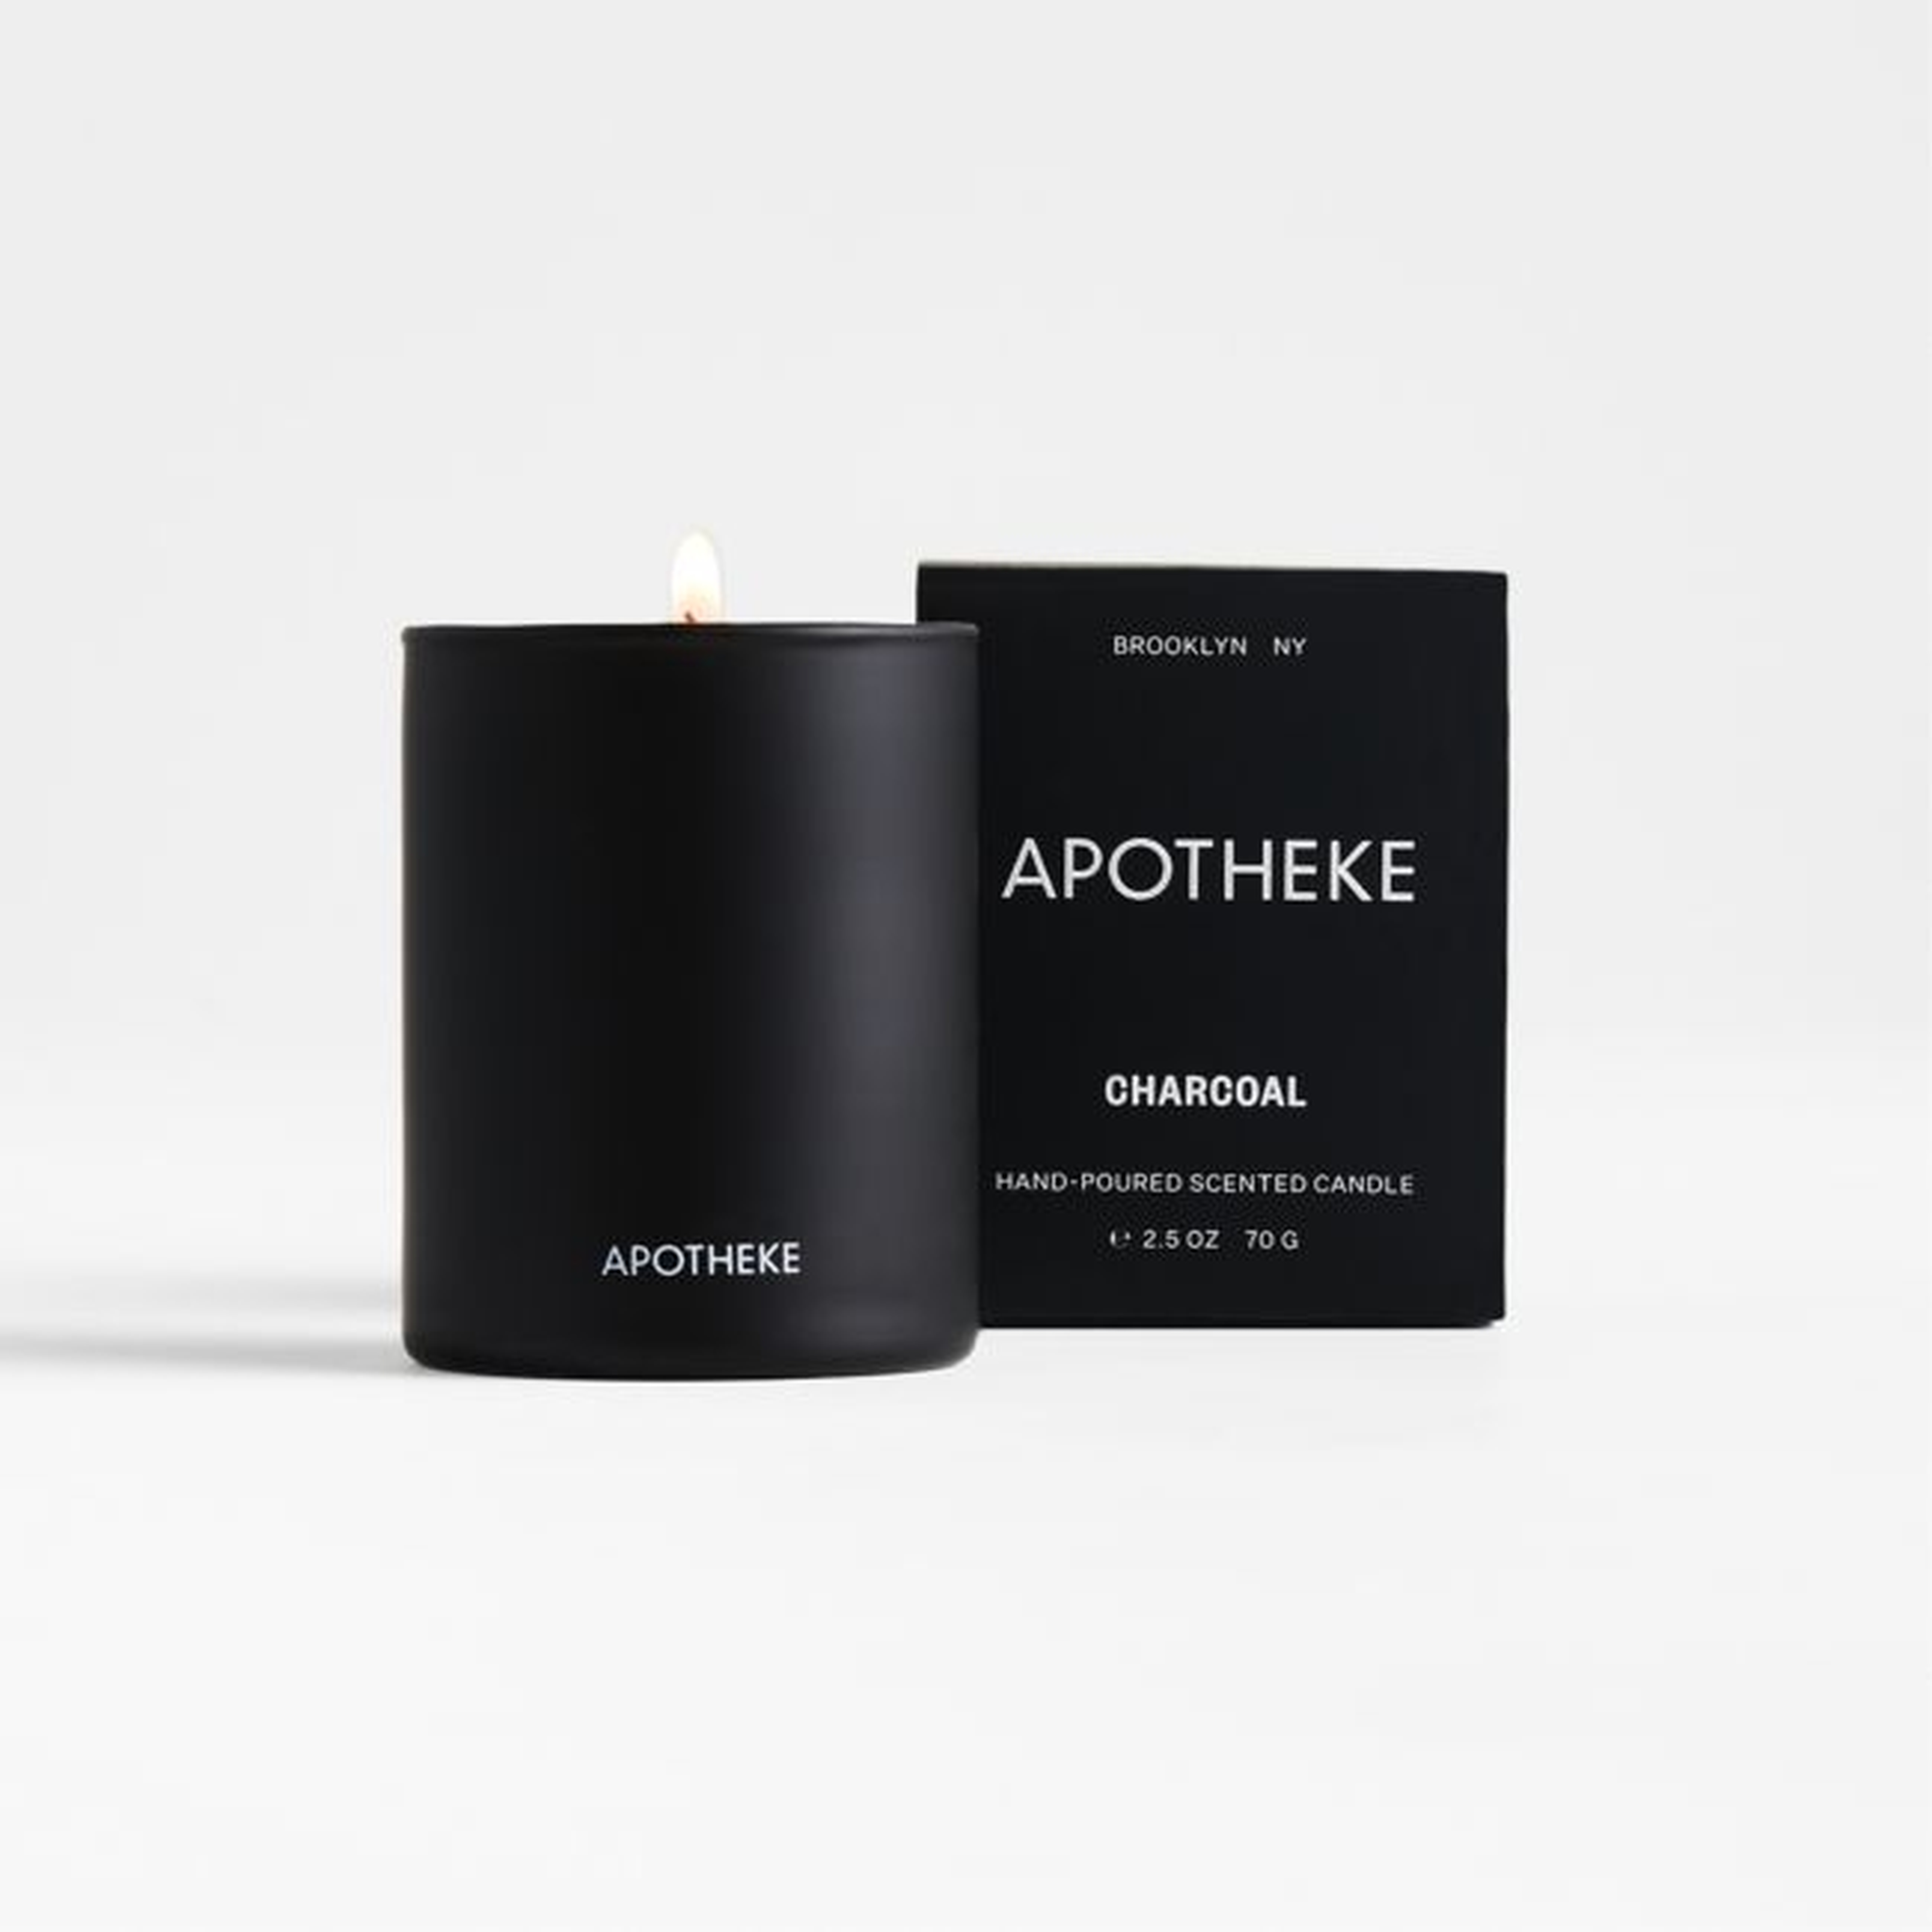 Apotheke Charcoal-Scented Votive Candle - Crate and Barrel